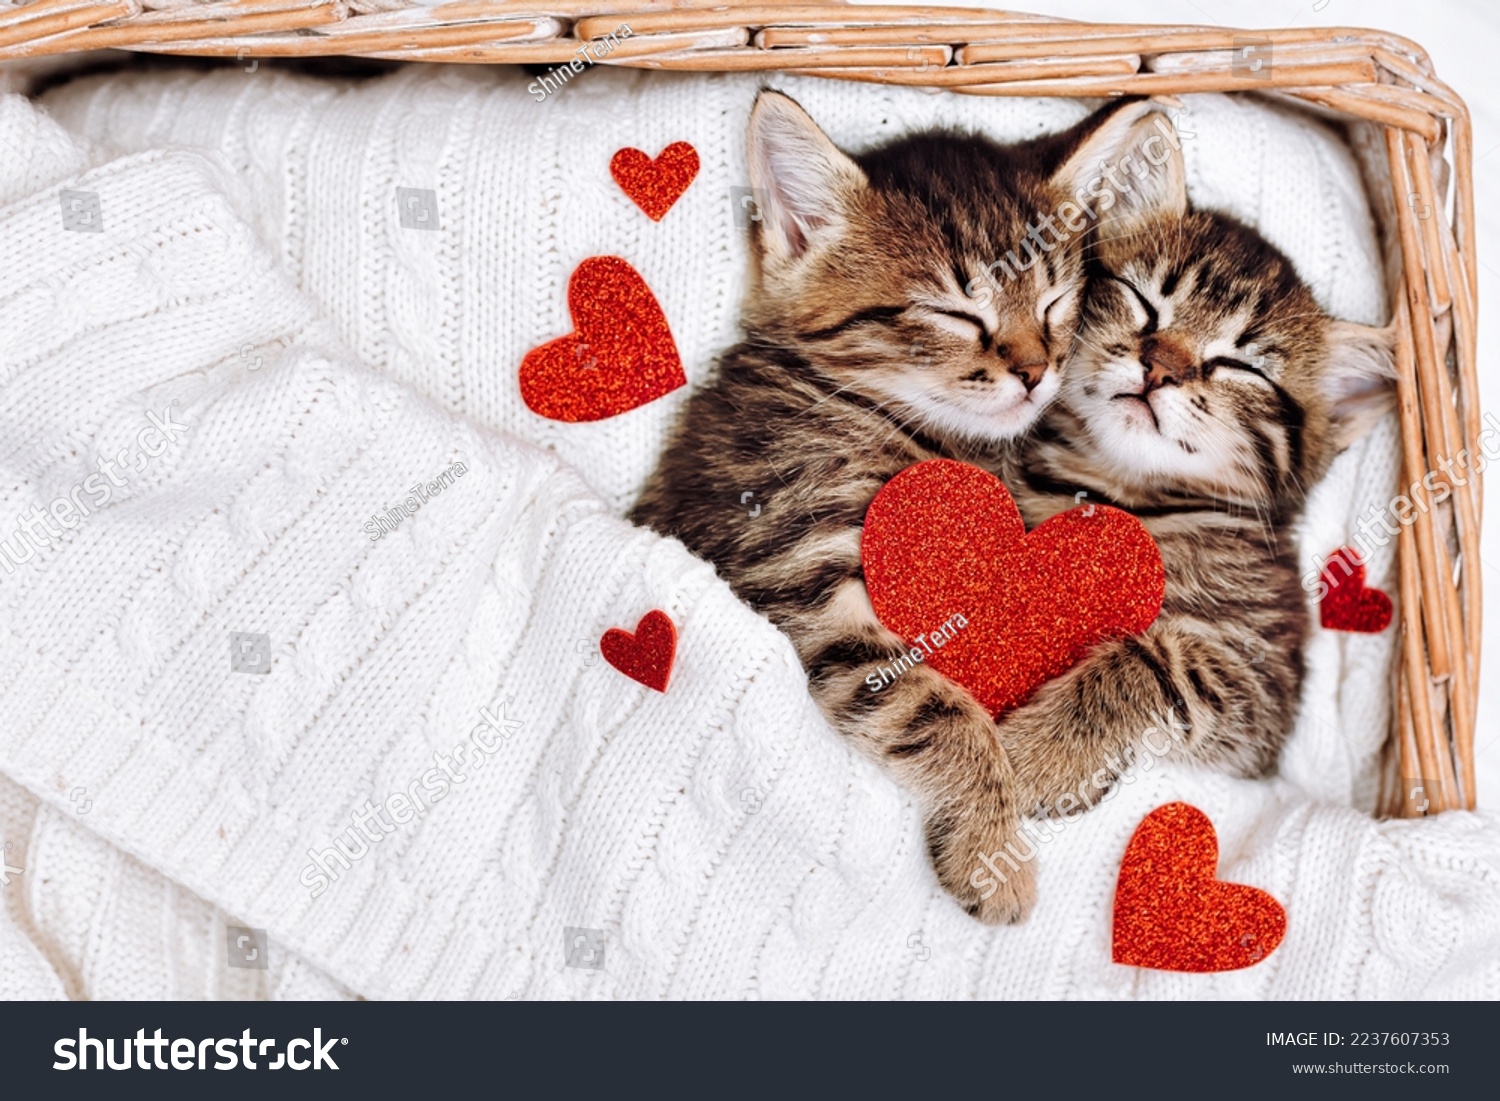 stock-photo-a-couple-of-happy-kittens-sleep-together-in-a-cozy-basket-kittens-loving-each-othe...jpg